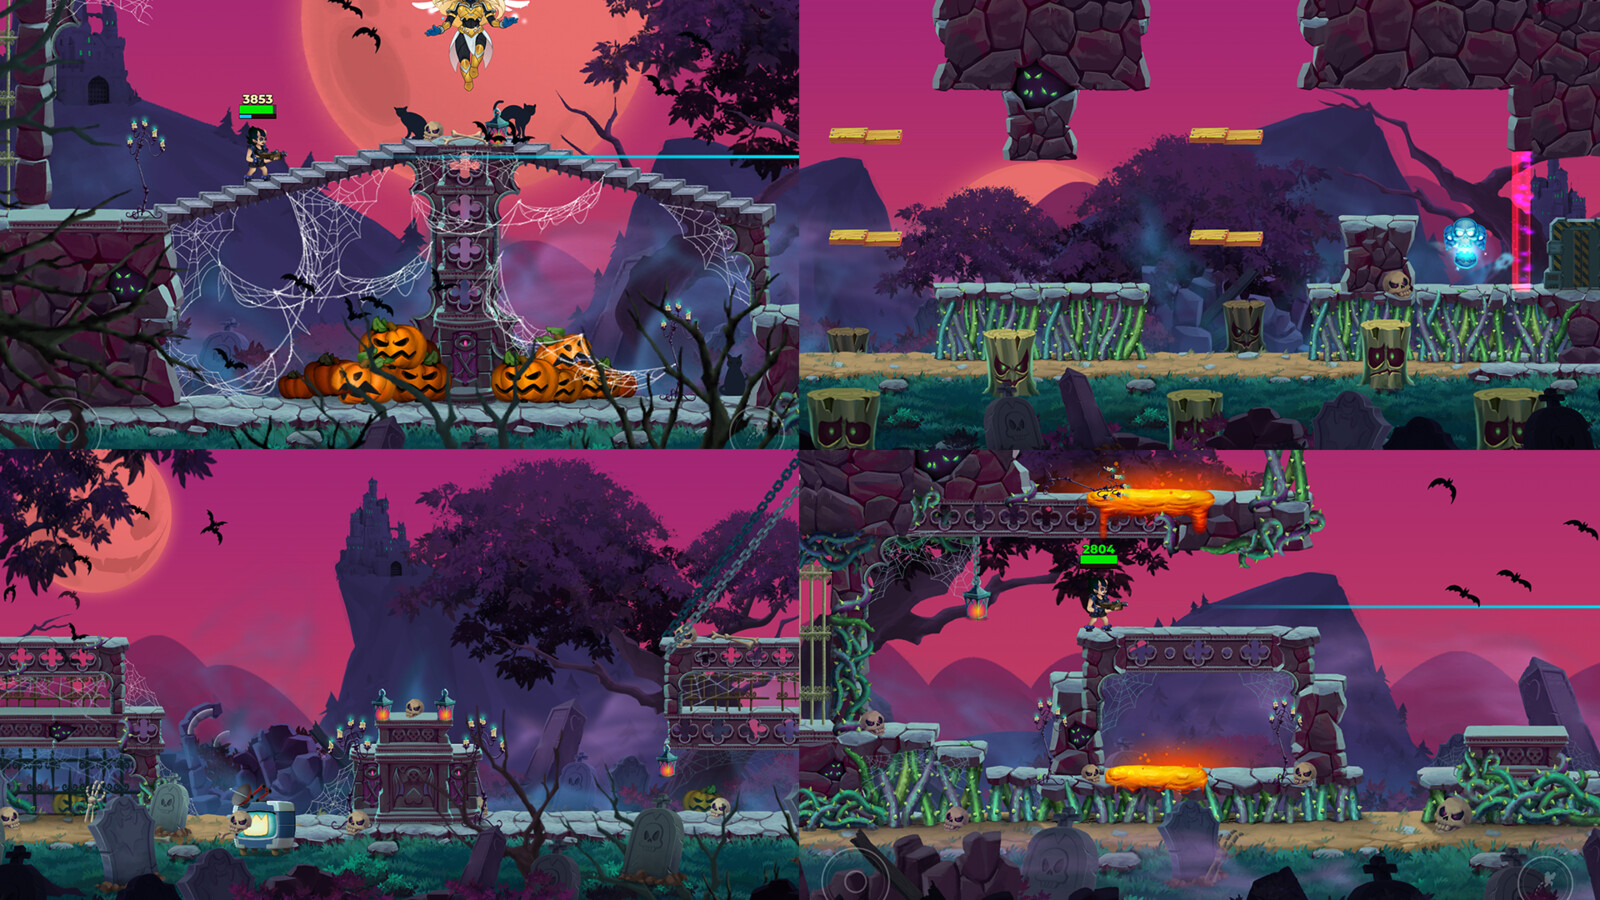 In-game screenshots by Lightheart. Disclaimer: Pumpkins, bats, blue skull totem and lava floor not made by me.